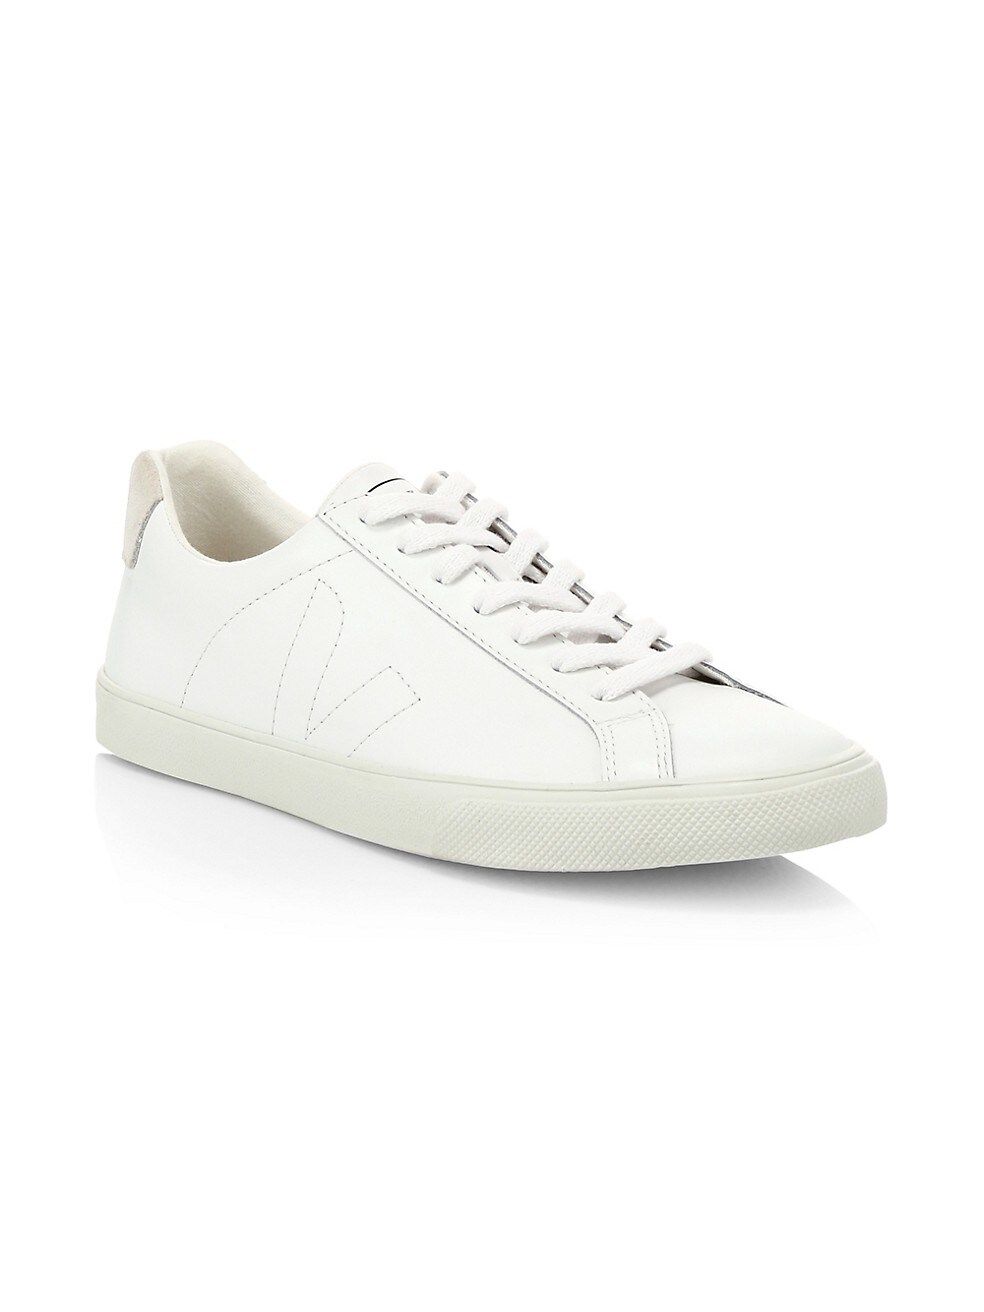 Esplar Stitched Logo Leather Low-Top Sneakers | Saks Fifth Avenue